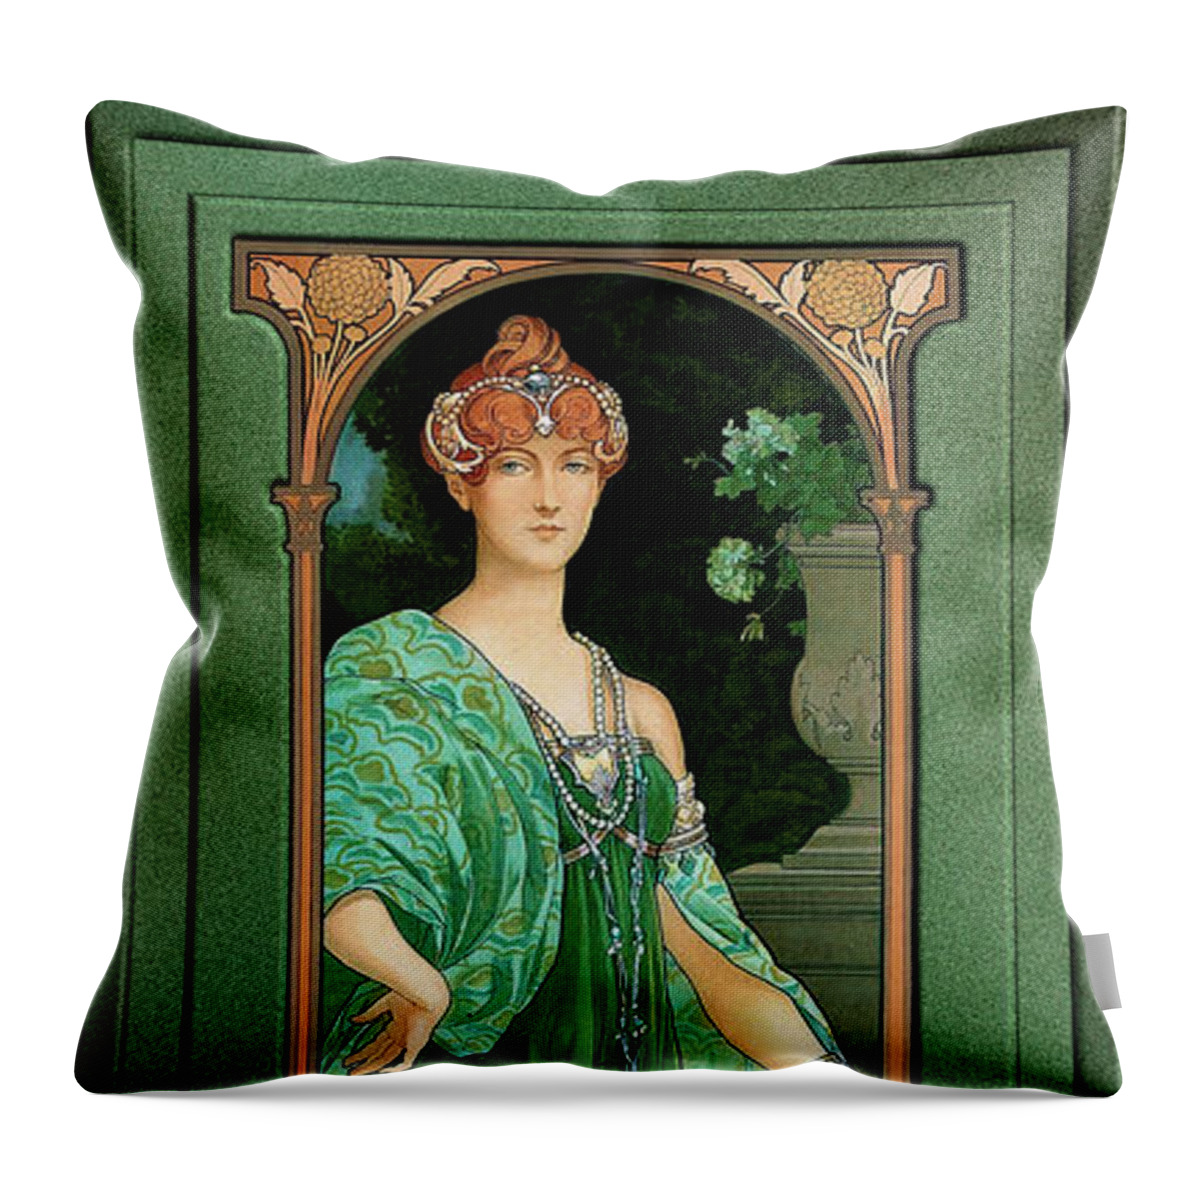 The Majestic Peacock Throw Pillow featuring the painting The Majestic Peacock by Elisabeth Sonrel by Rolando Burbon